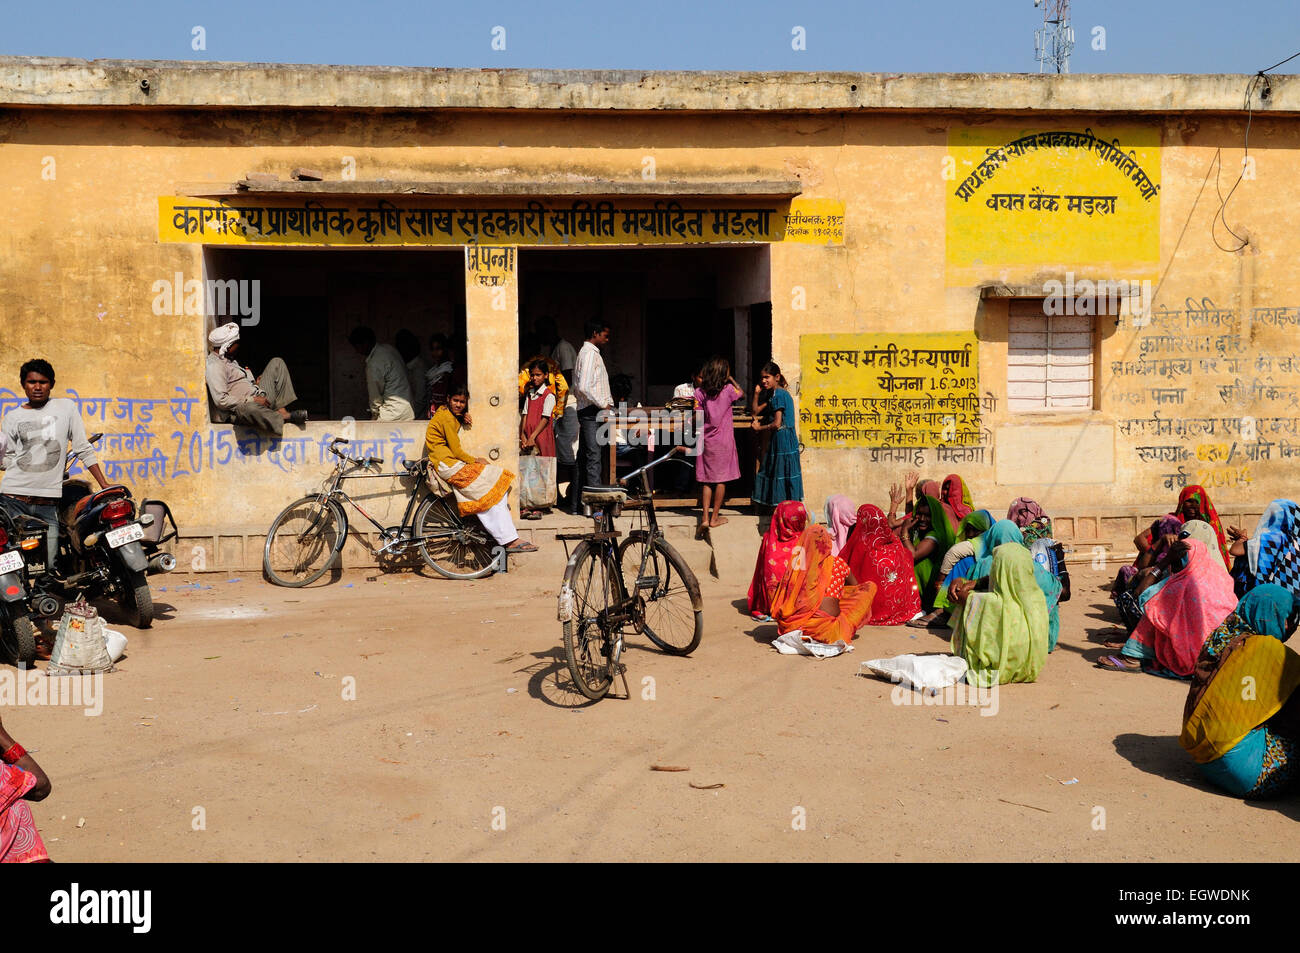 Indian food distribution center  for poor people Madhya Pradesh India Stock Photo